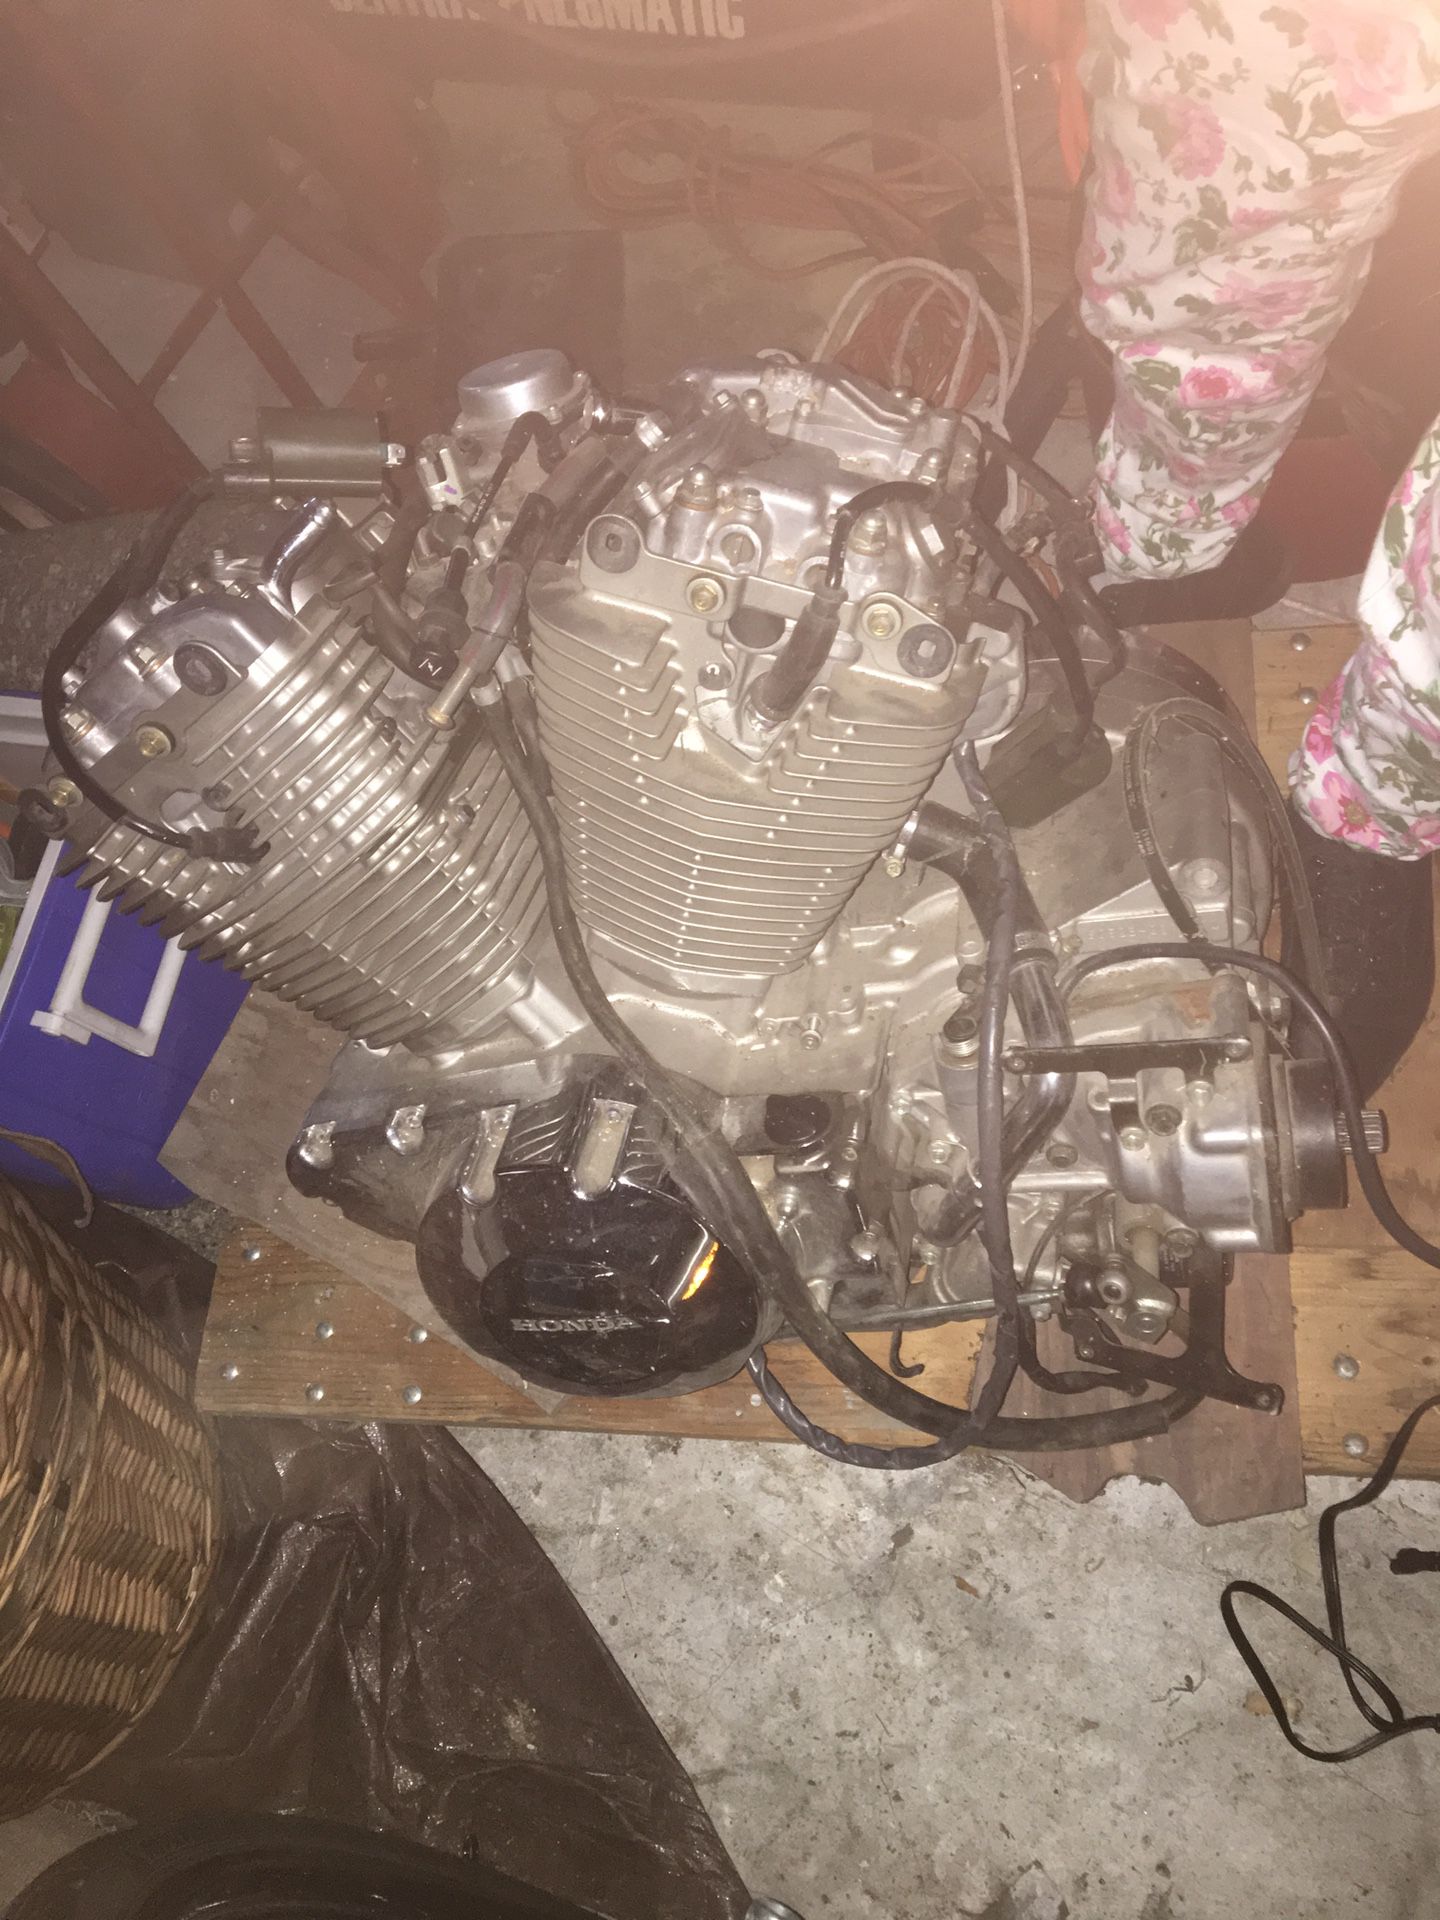 Honda v twin 1300 Motorcycle engine. Low miles super clean